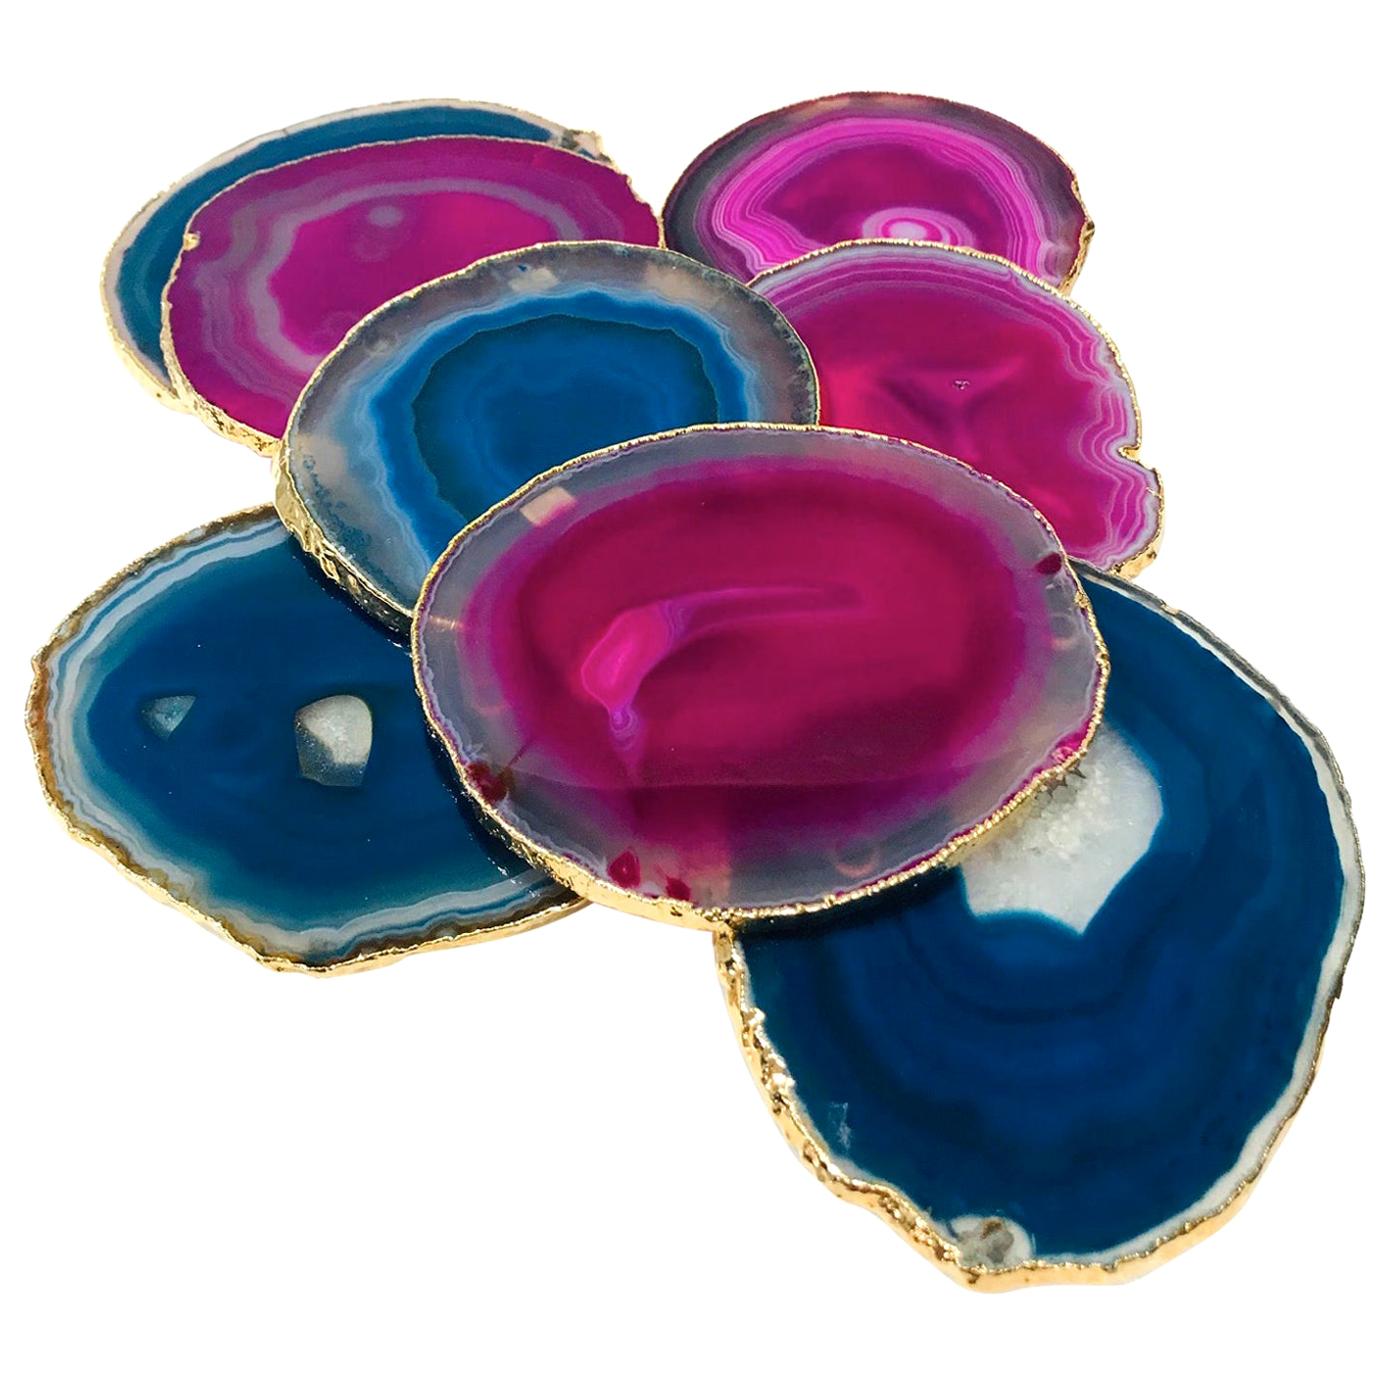 Semi-Precious Gemstone Coasters in Pink and Turquoise with 24k Gold Trim, Set /8 For Sale